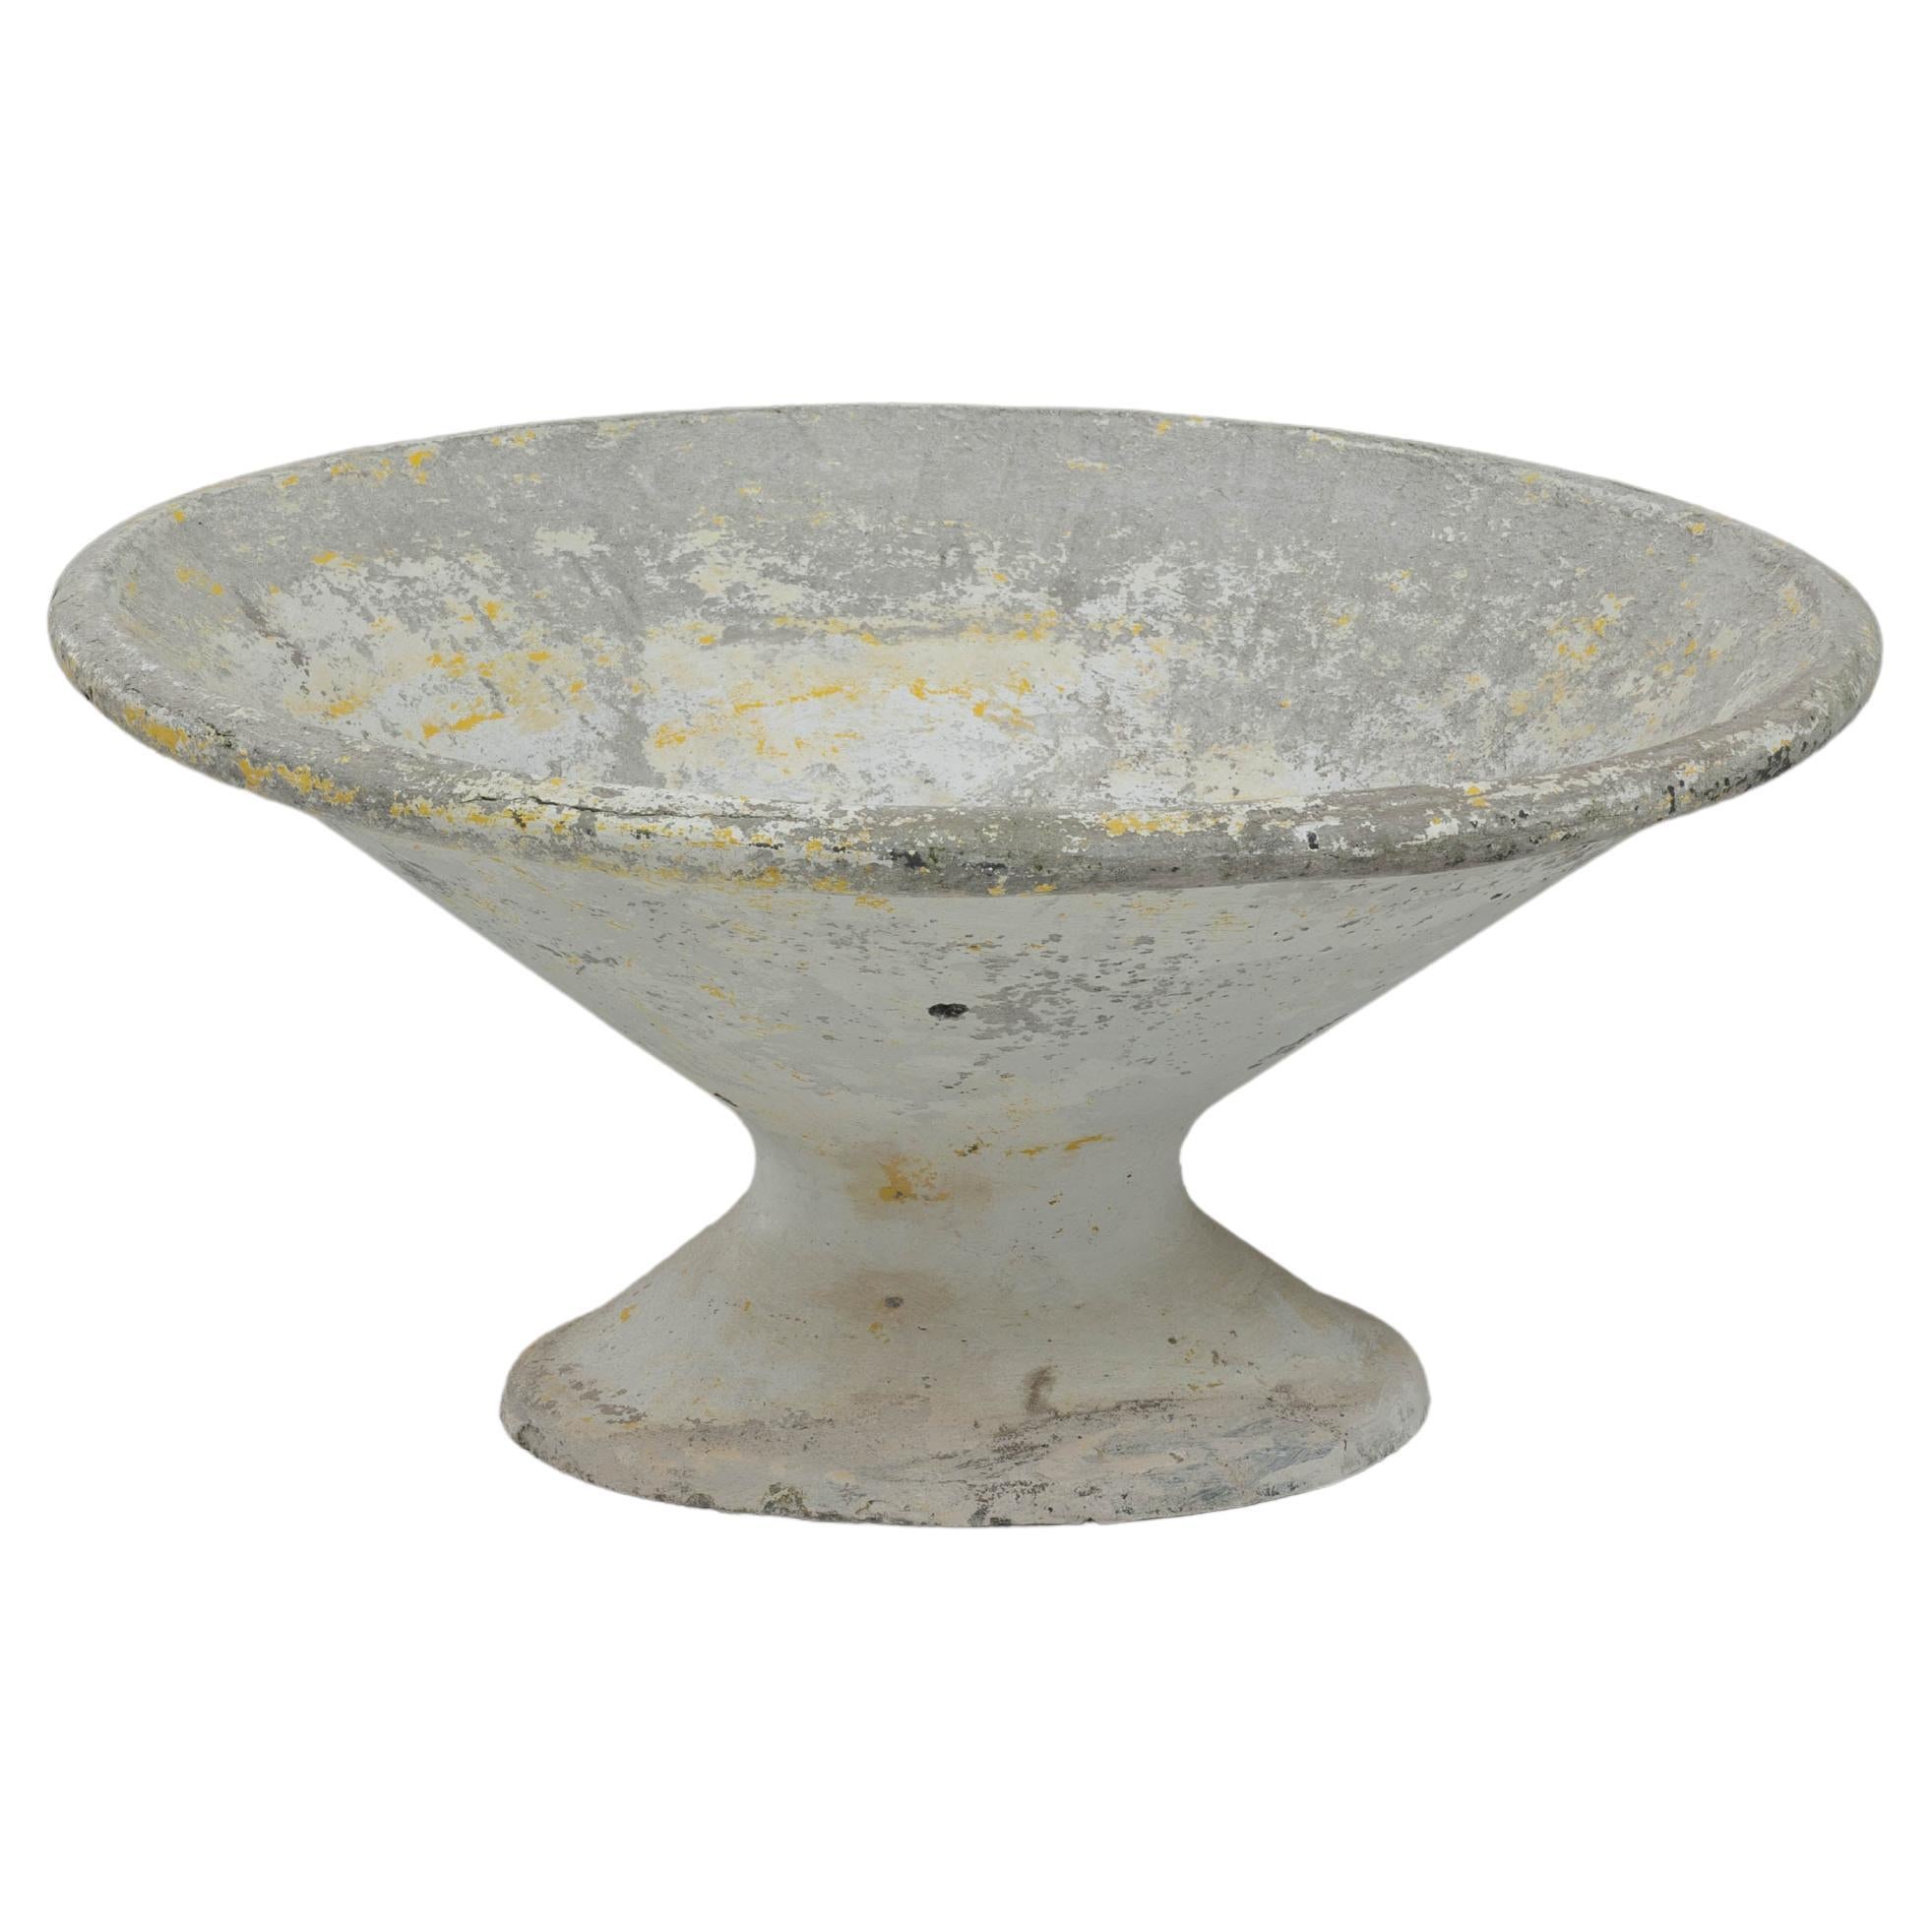 1960s French Concrete Planter By Willy Guhl For Sale